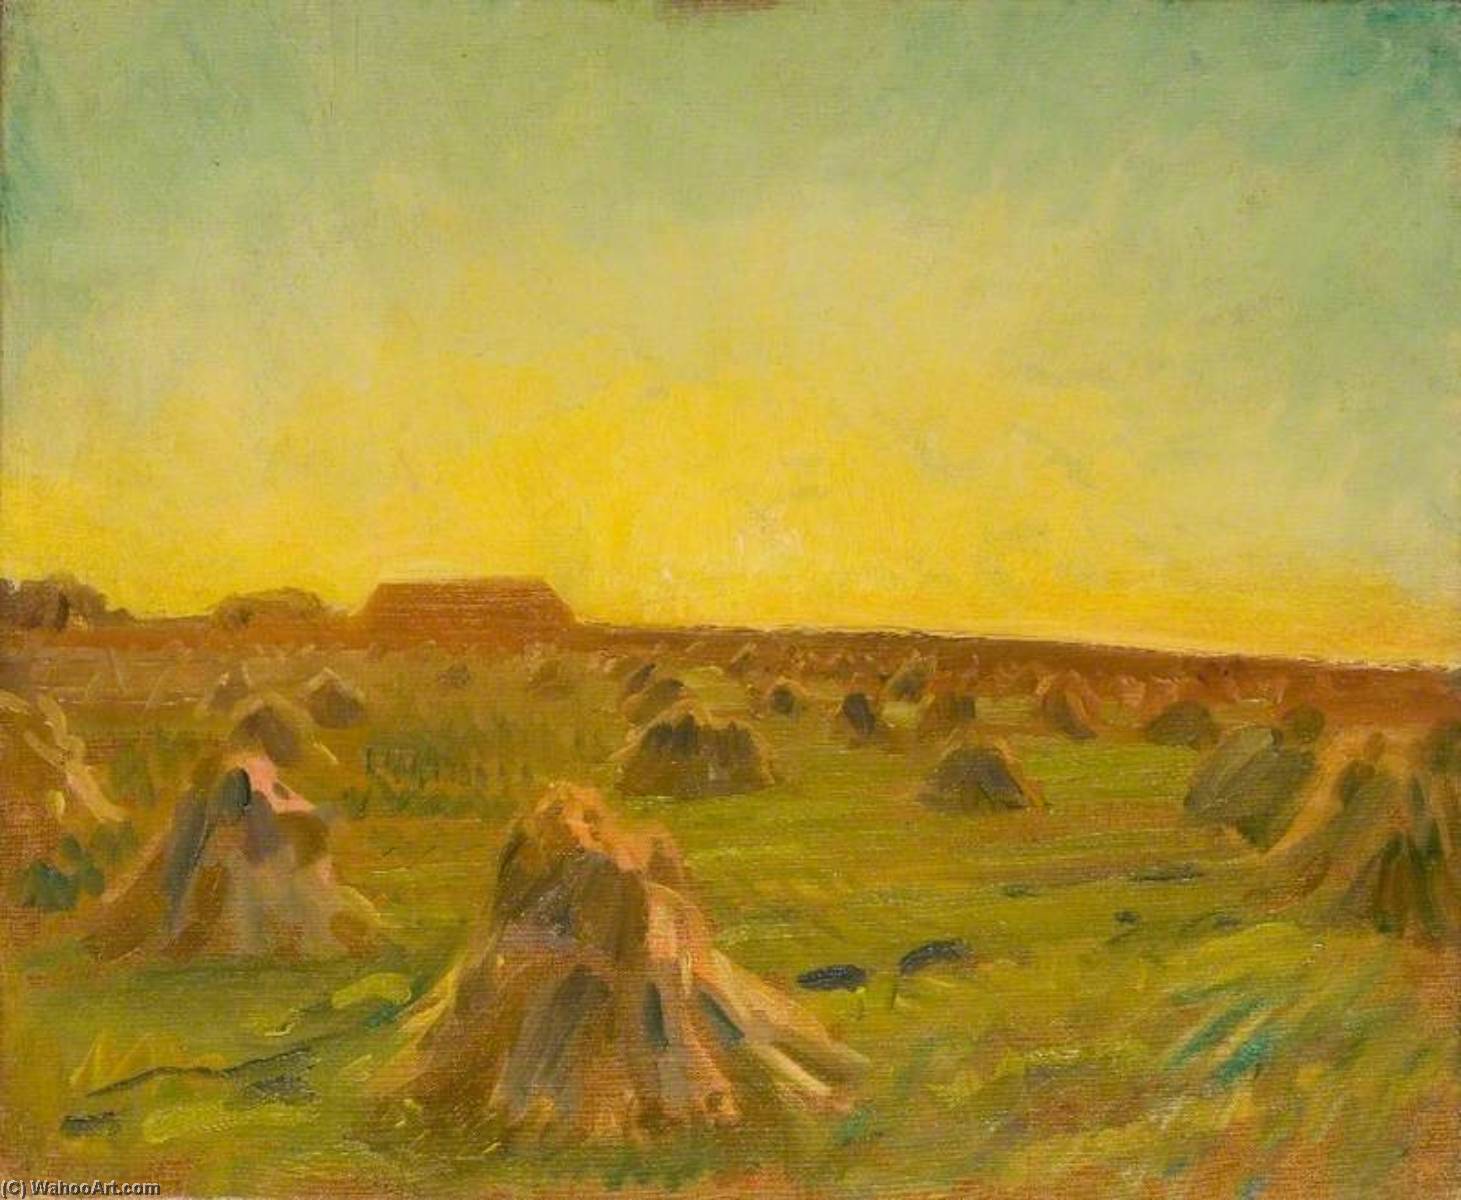 Sunset over a Harvest Field by Alfred James Munnings Alfred James Munnings | ArtsDot.com